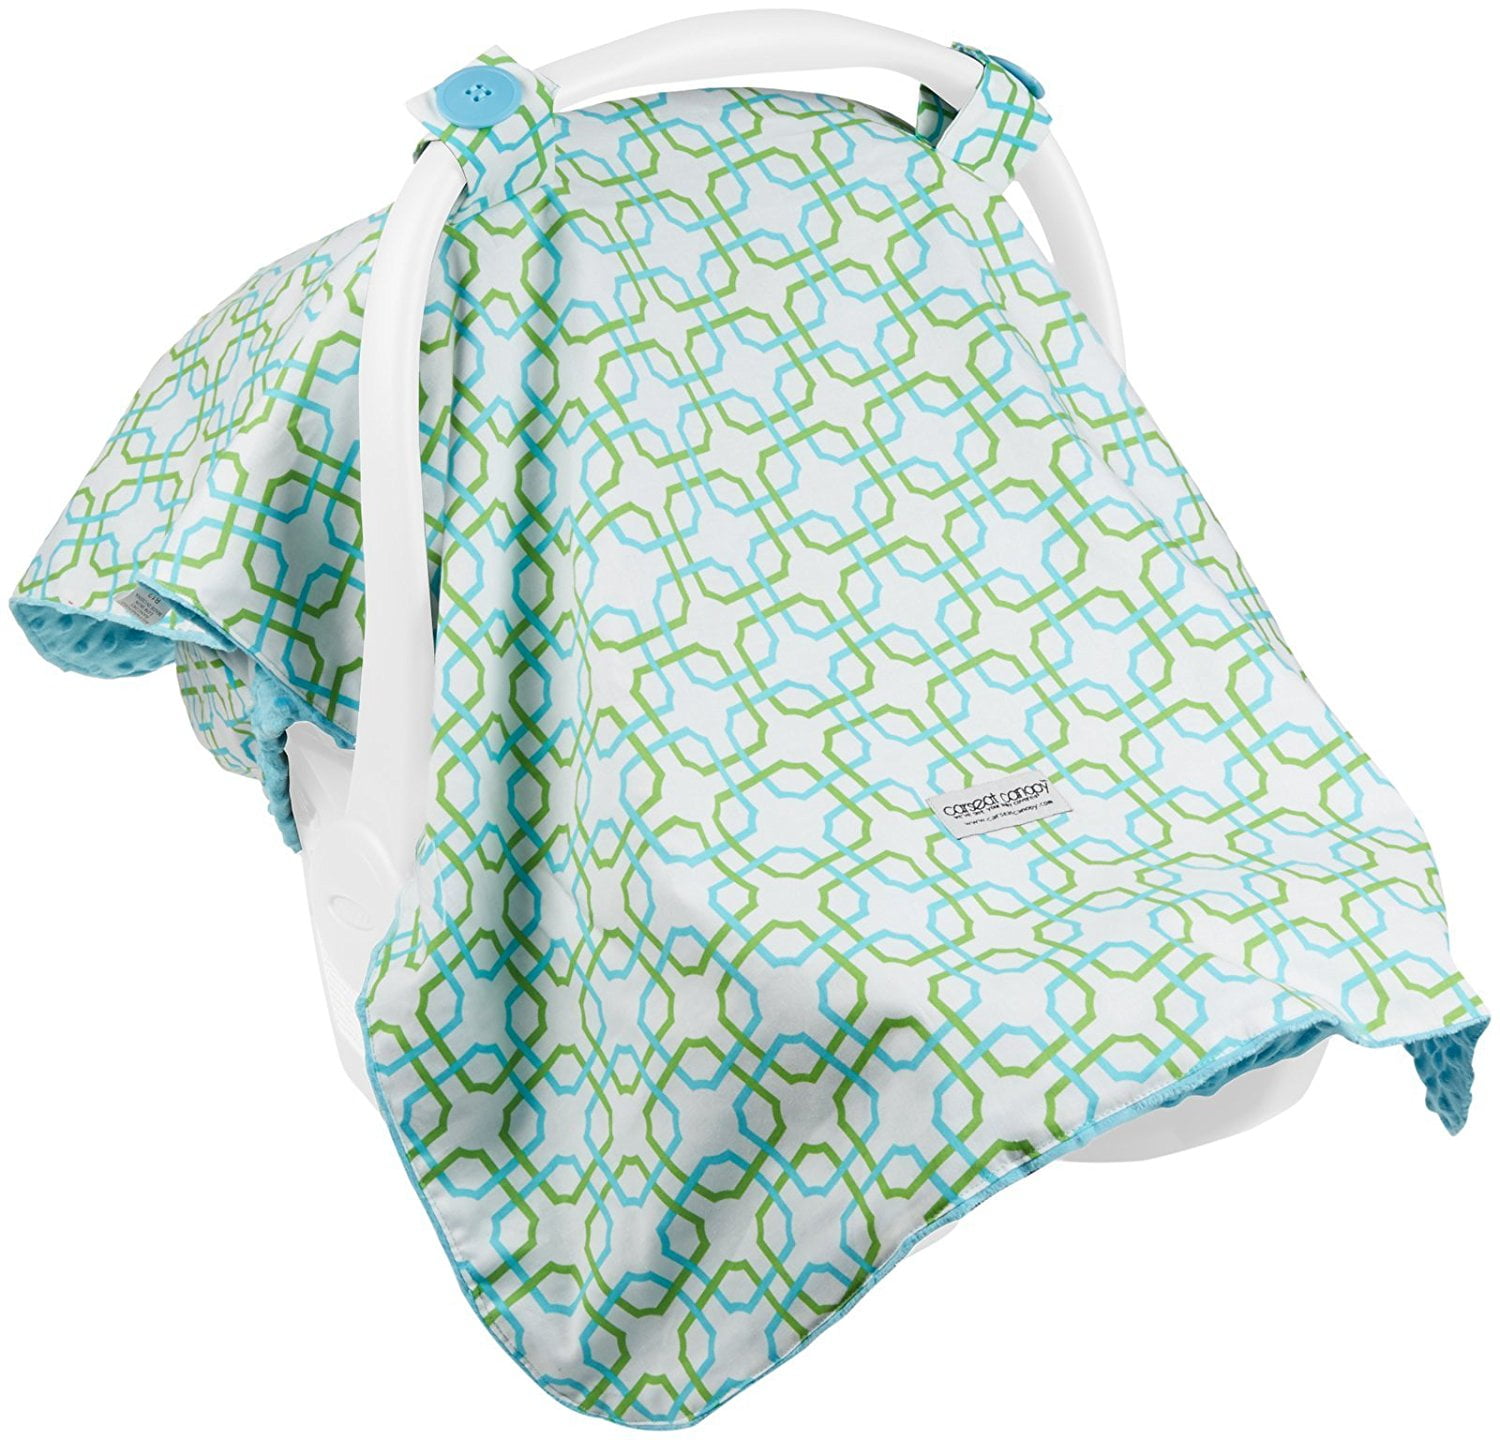 CARSEAT CANOPY BABY CAR SEAT CANOPY COVER BLANKET COTTON BRAND NEW " REAGAN " 